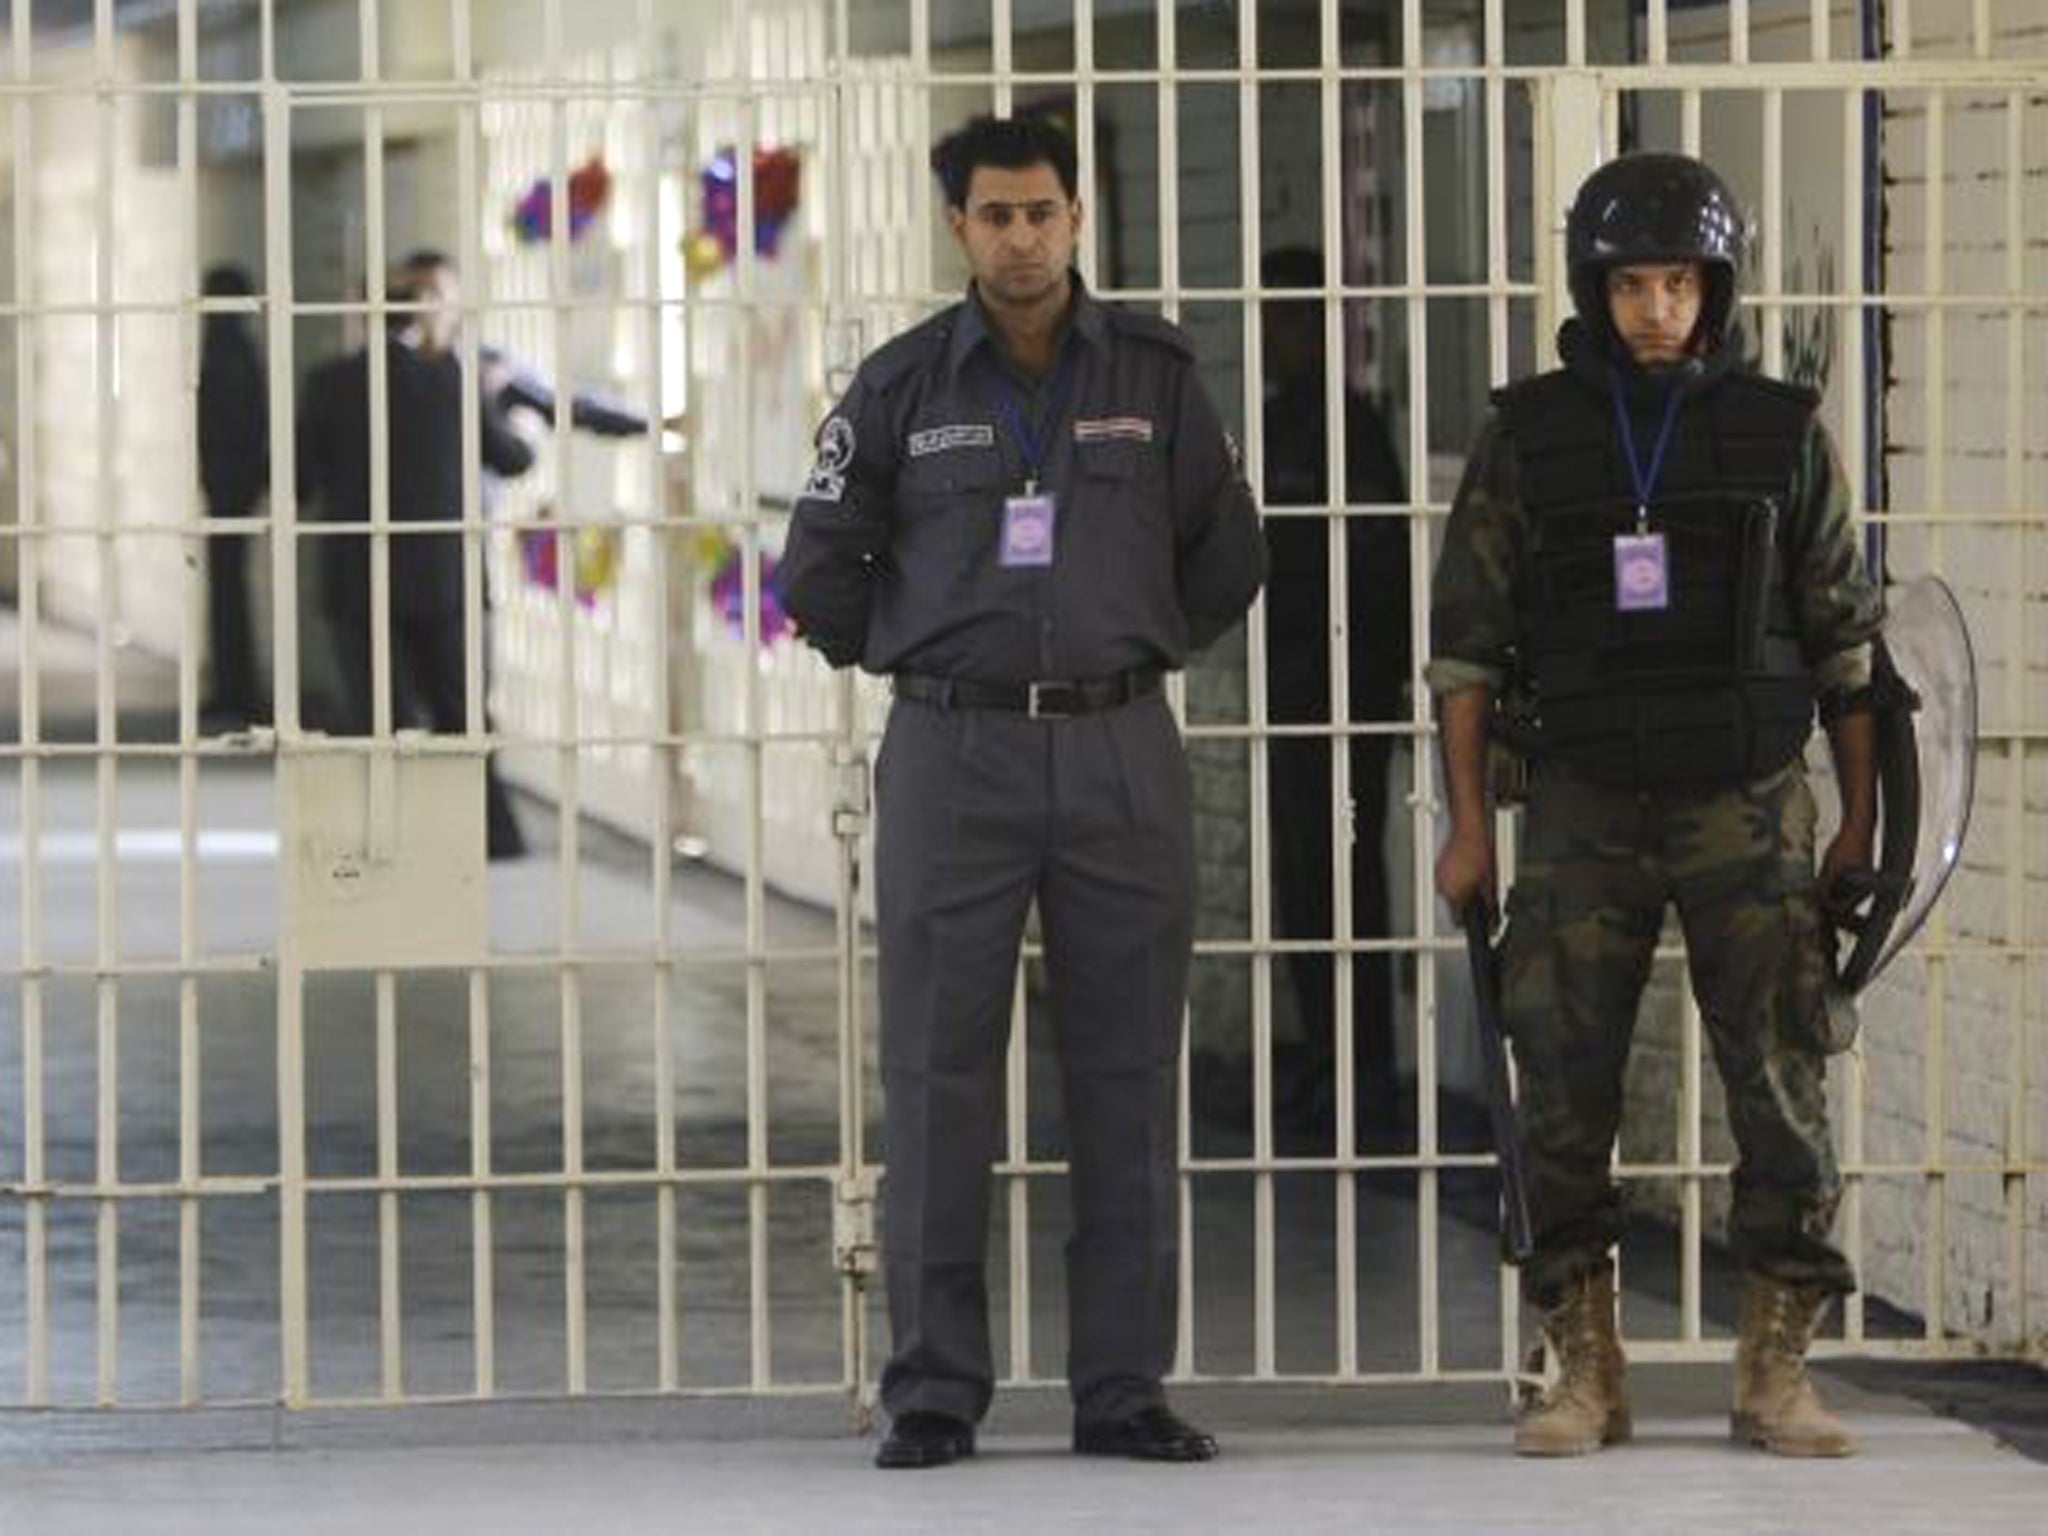 Guards stand at a cell block at the renovated Abu Ghraib prison, now renamed Baghdad Central Prison and run by Iraqis